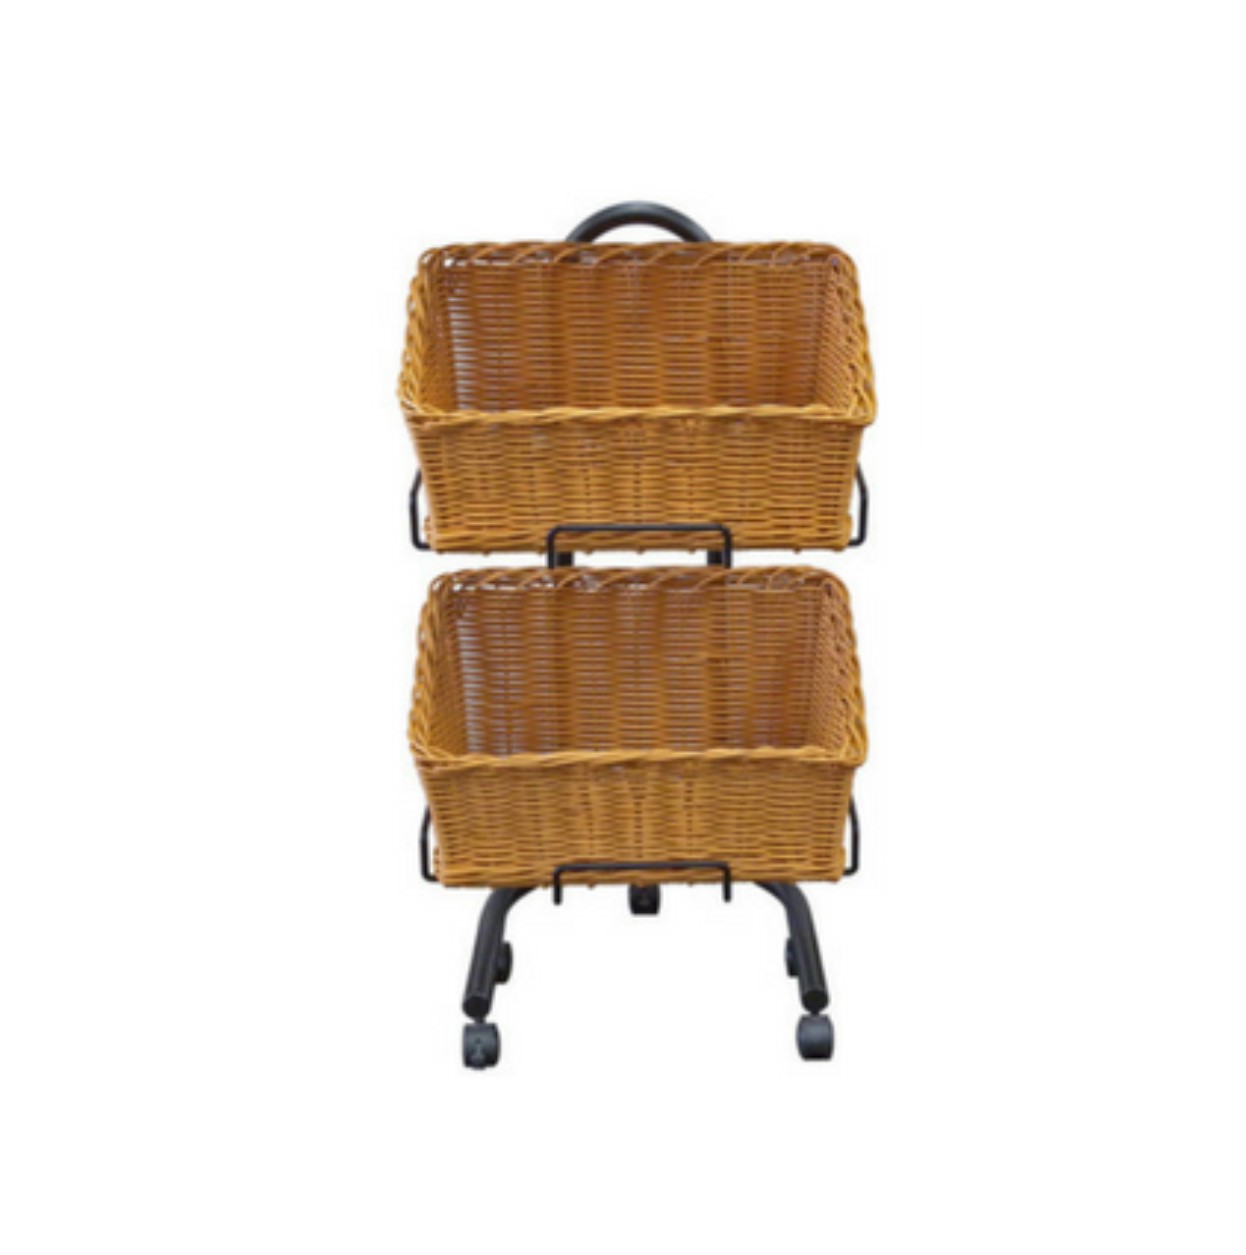 Polywicker Slanted Baskets Double Stand